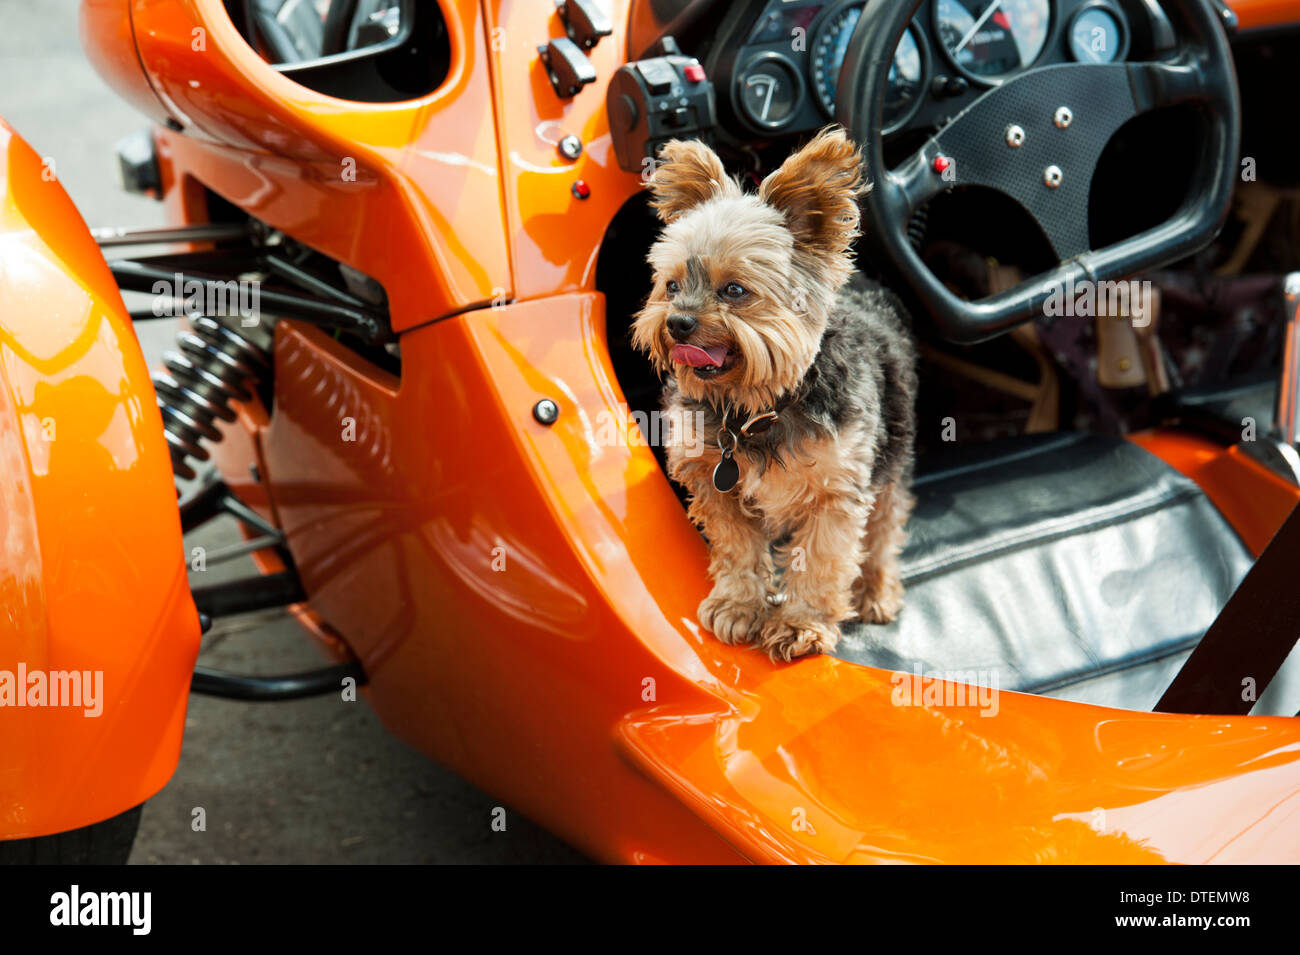 A Yorkshire Terrier (Canis lupus familiaris) in a Campagna T-Rex 14-RR three wheeled motorcycle Cyclecar. Stock Photo